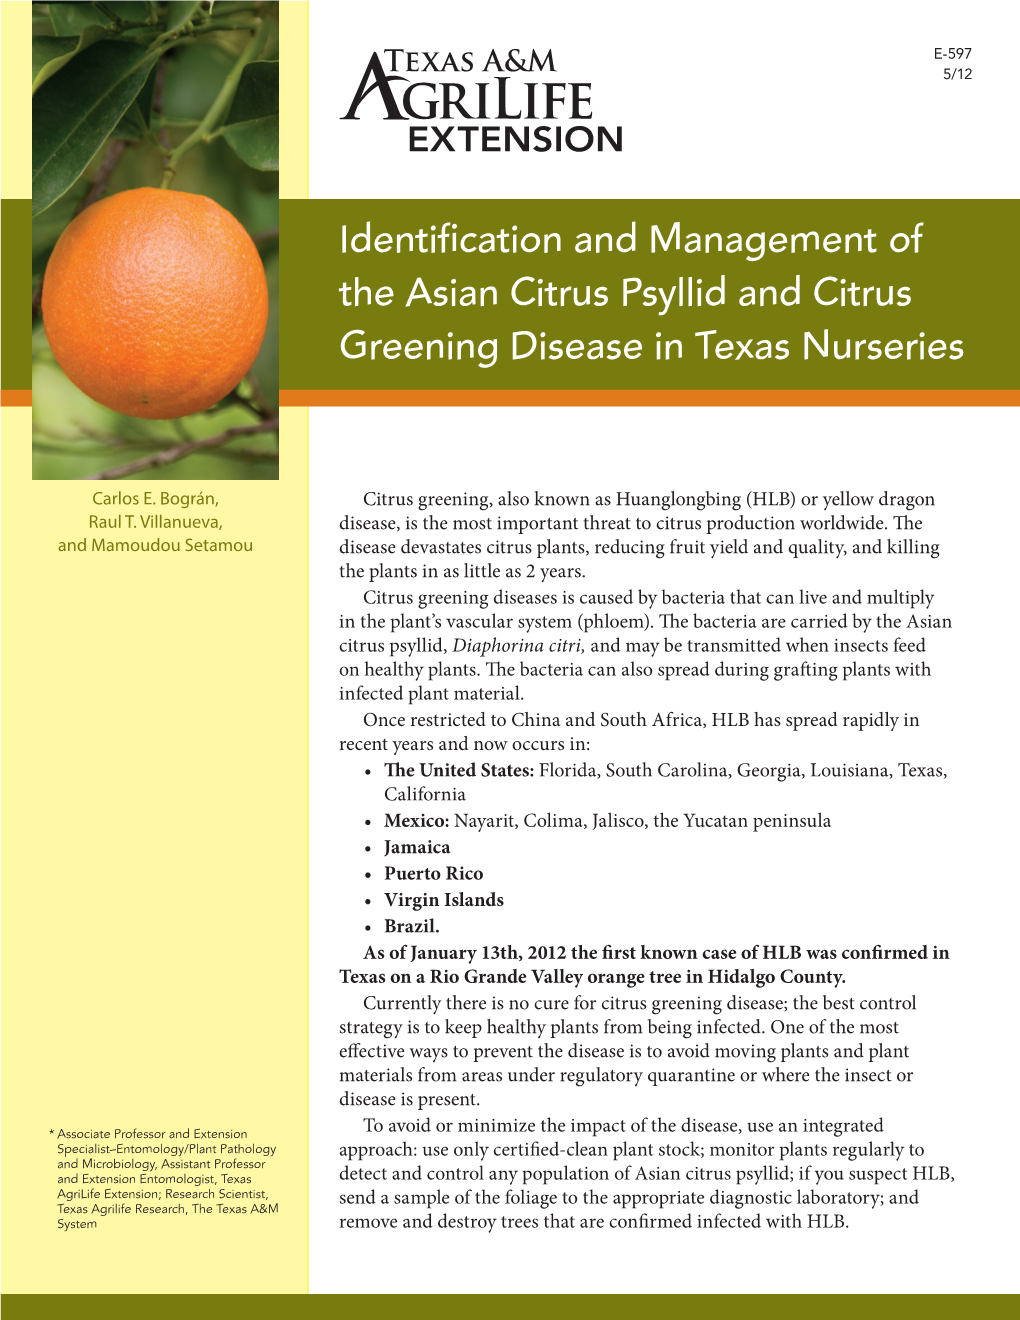 Identification and Management of the Asian Citrus Psyllid and Citrus Greening Disease in Texas Nurseries